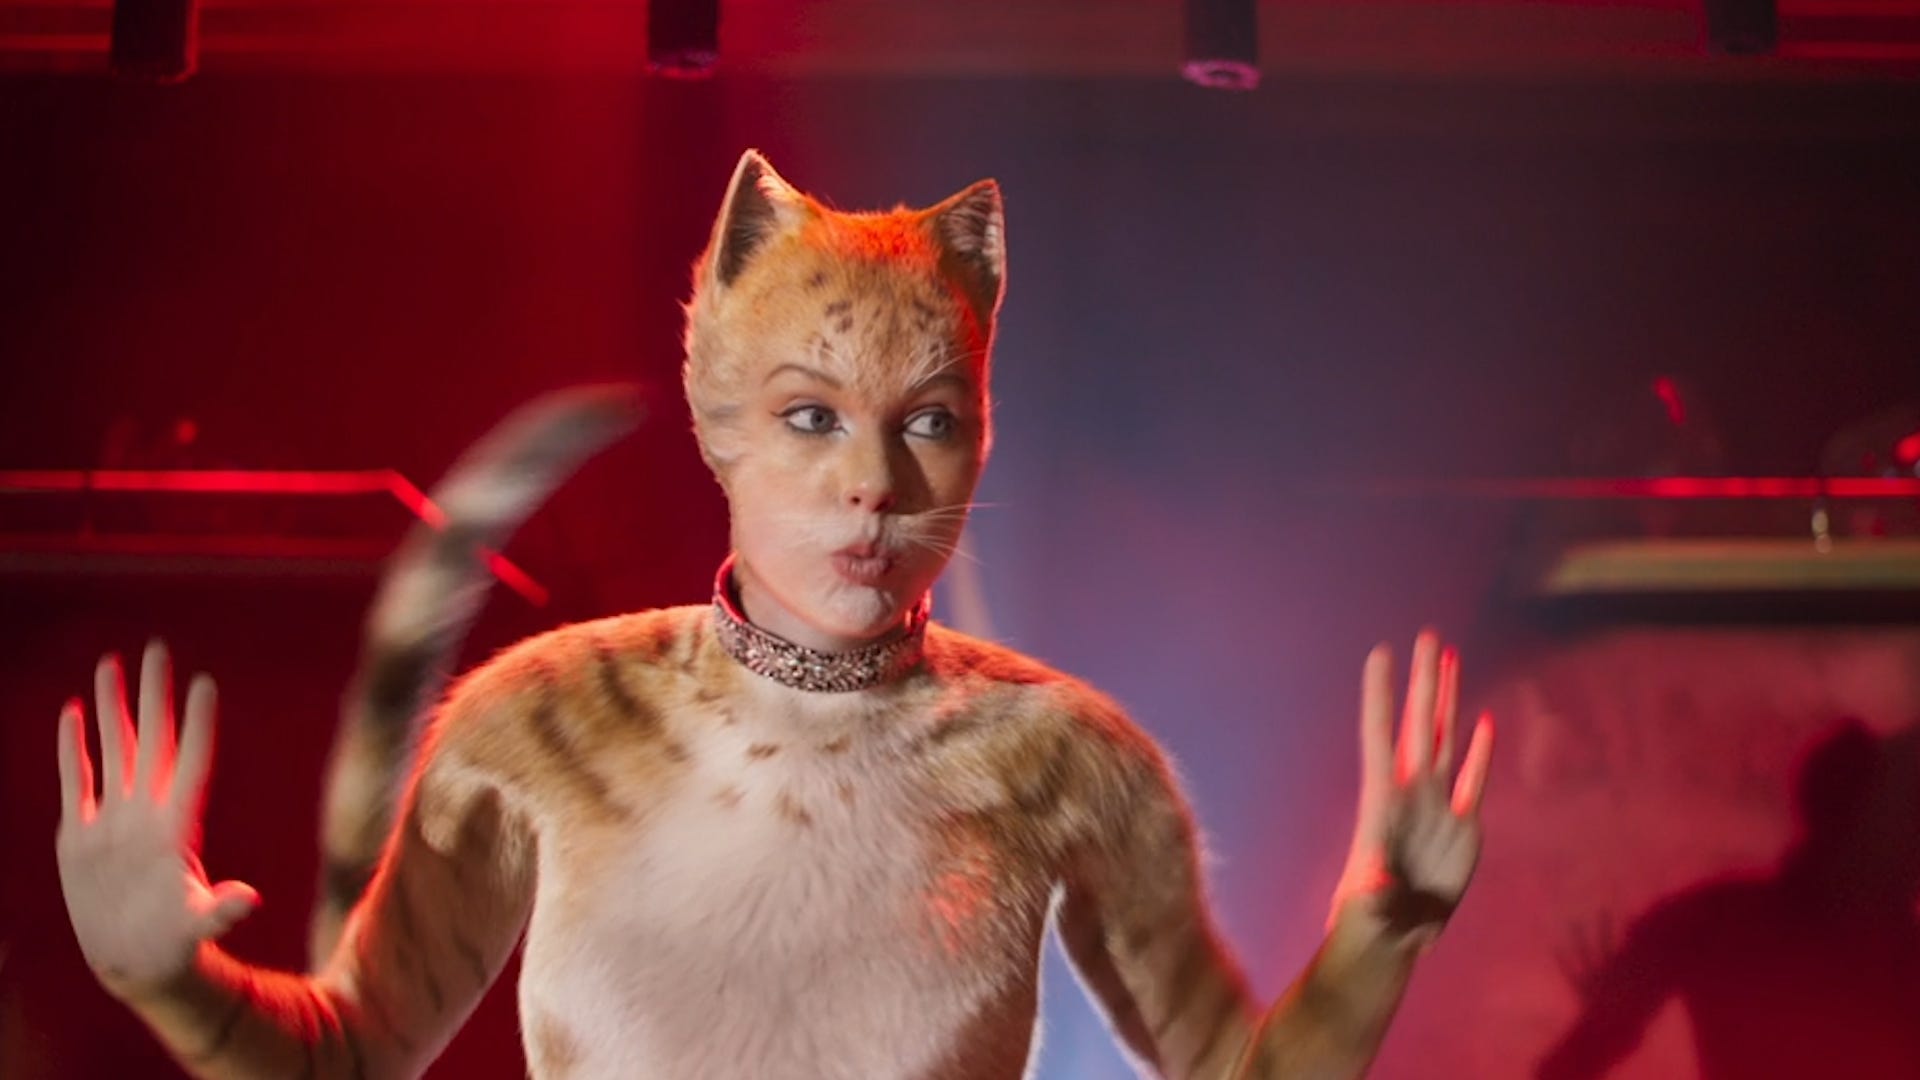 Cats': Taylor Swift has one line in the movie, but crushes her song